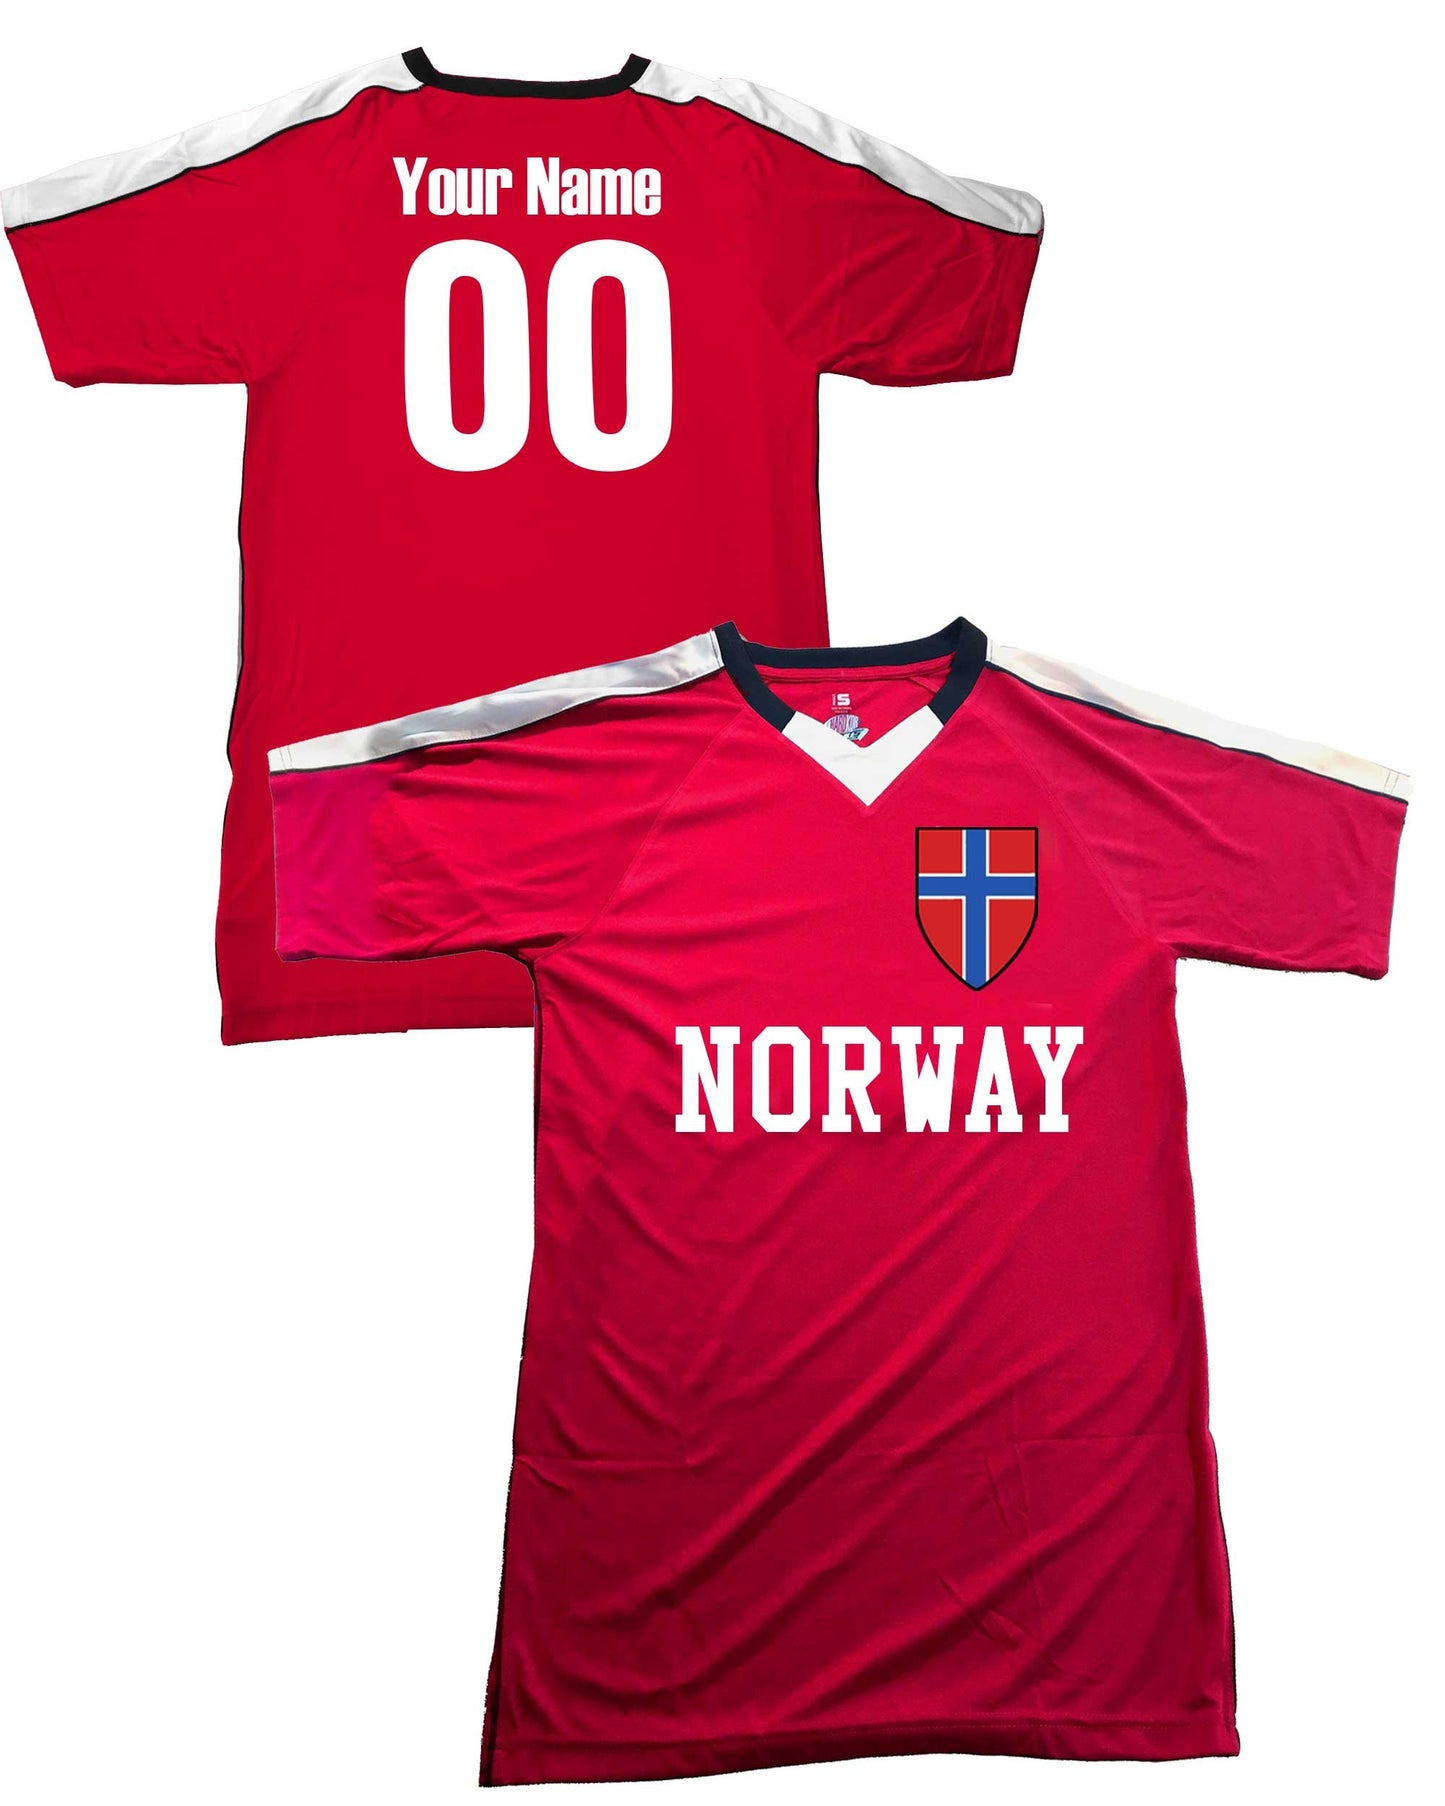 Norway Custom Soccer Jersey with Norwegian Flag on Front, Personalized with your Name and Number on back